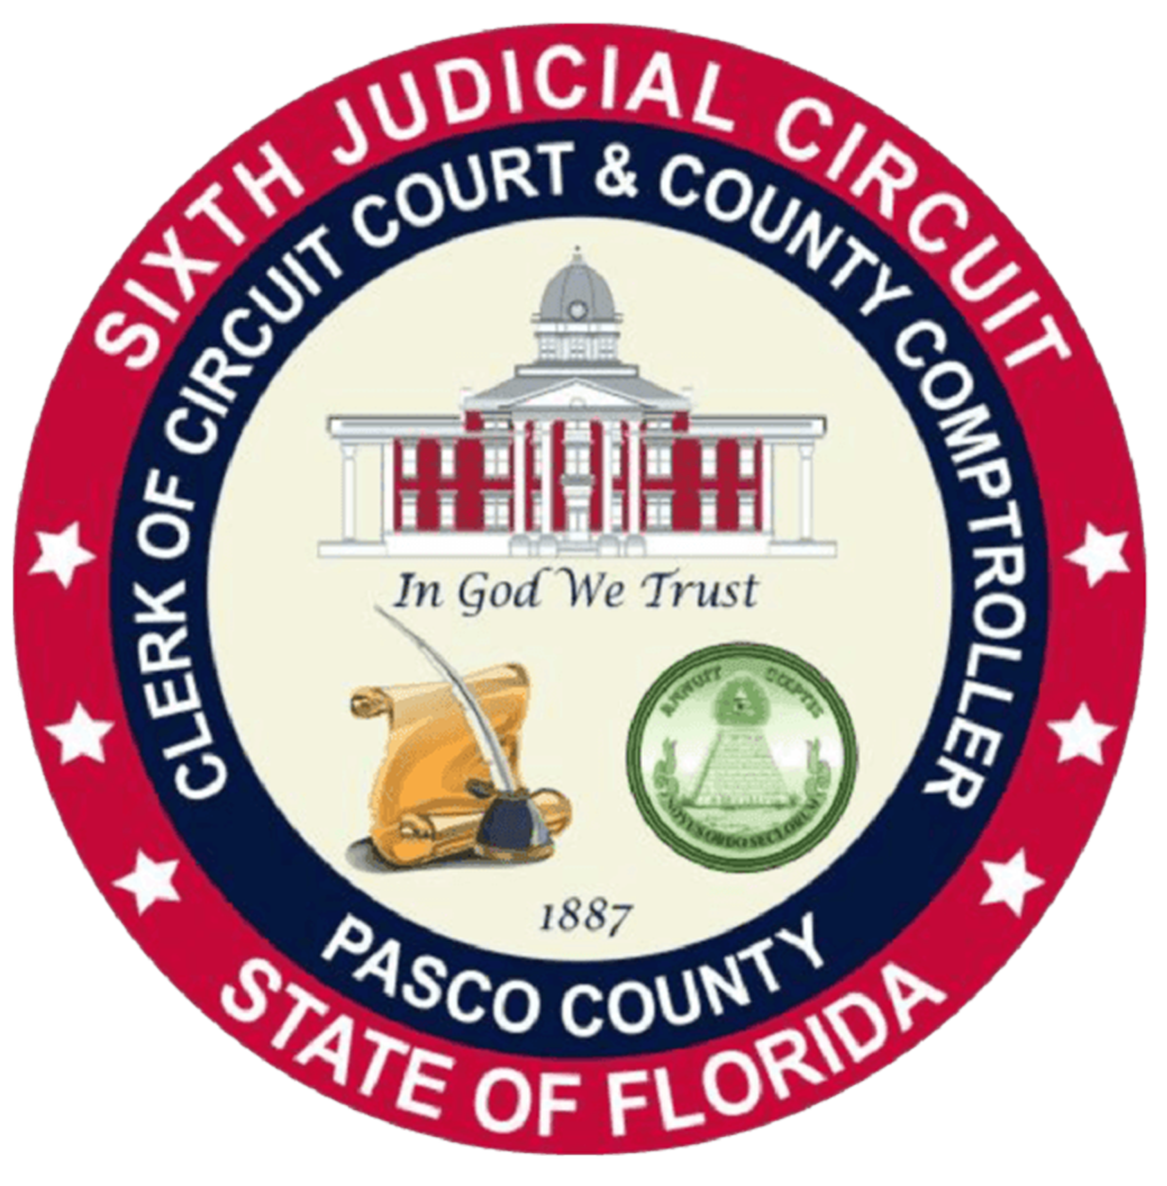 Pasco County Clerk and Comptroller, manages county audits, finance services, public records and more.